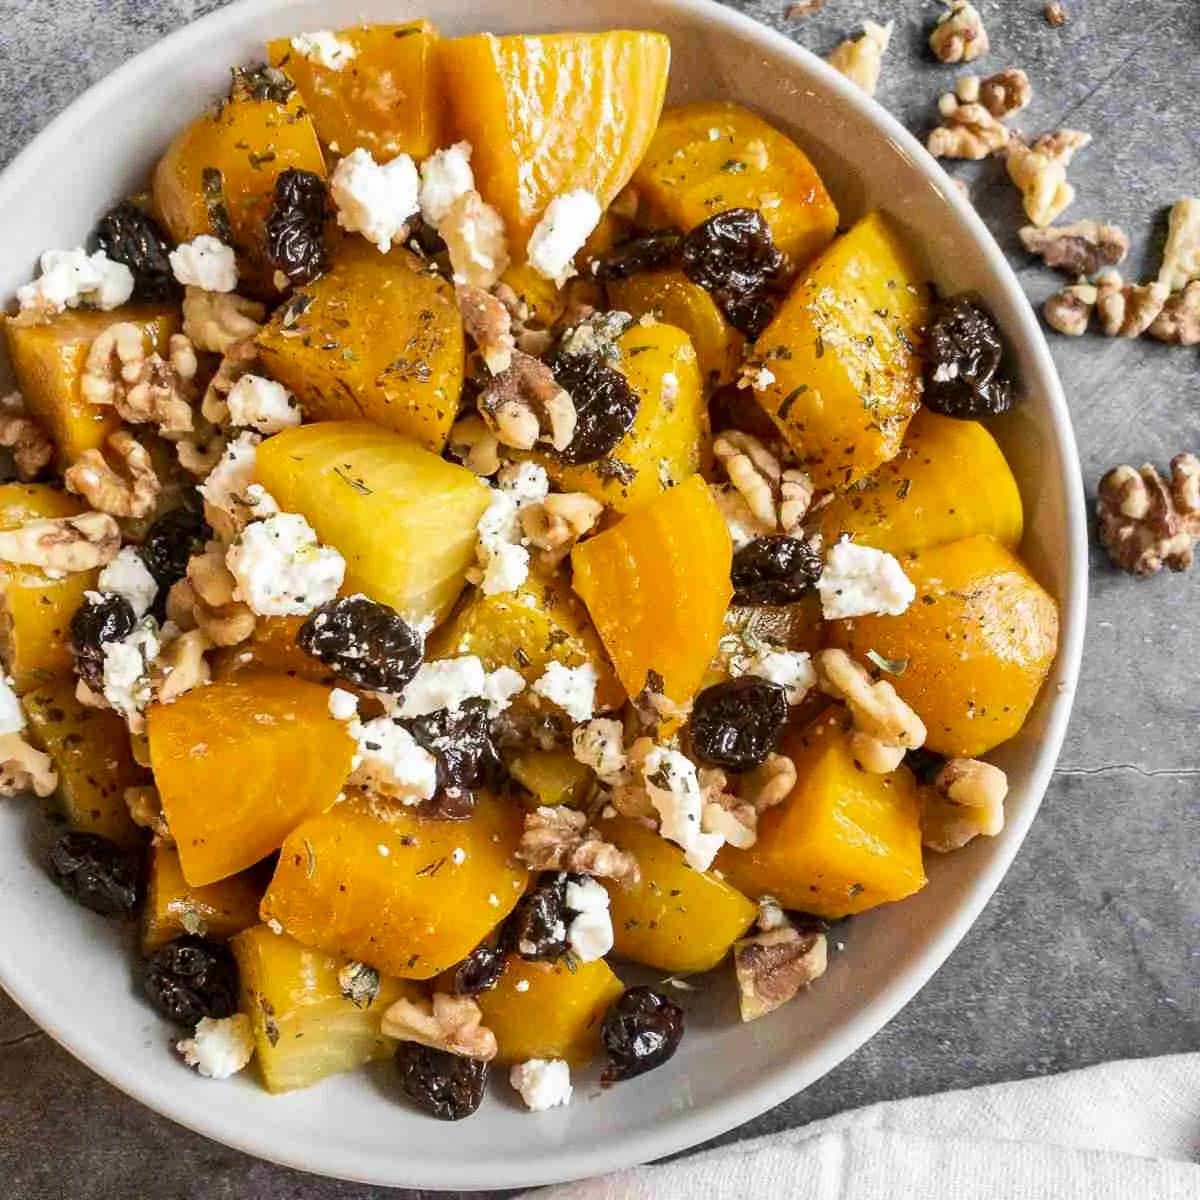 Chunks of roasted golden beets in a round white bowl tossed with roasted cherries, walnuts, and pieces of goat cheese.